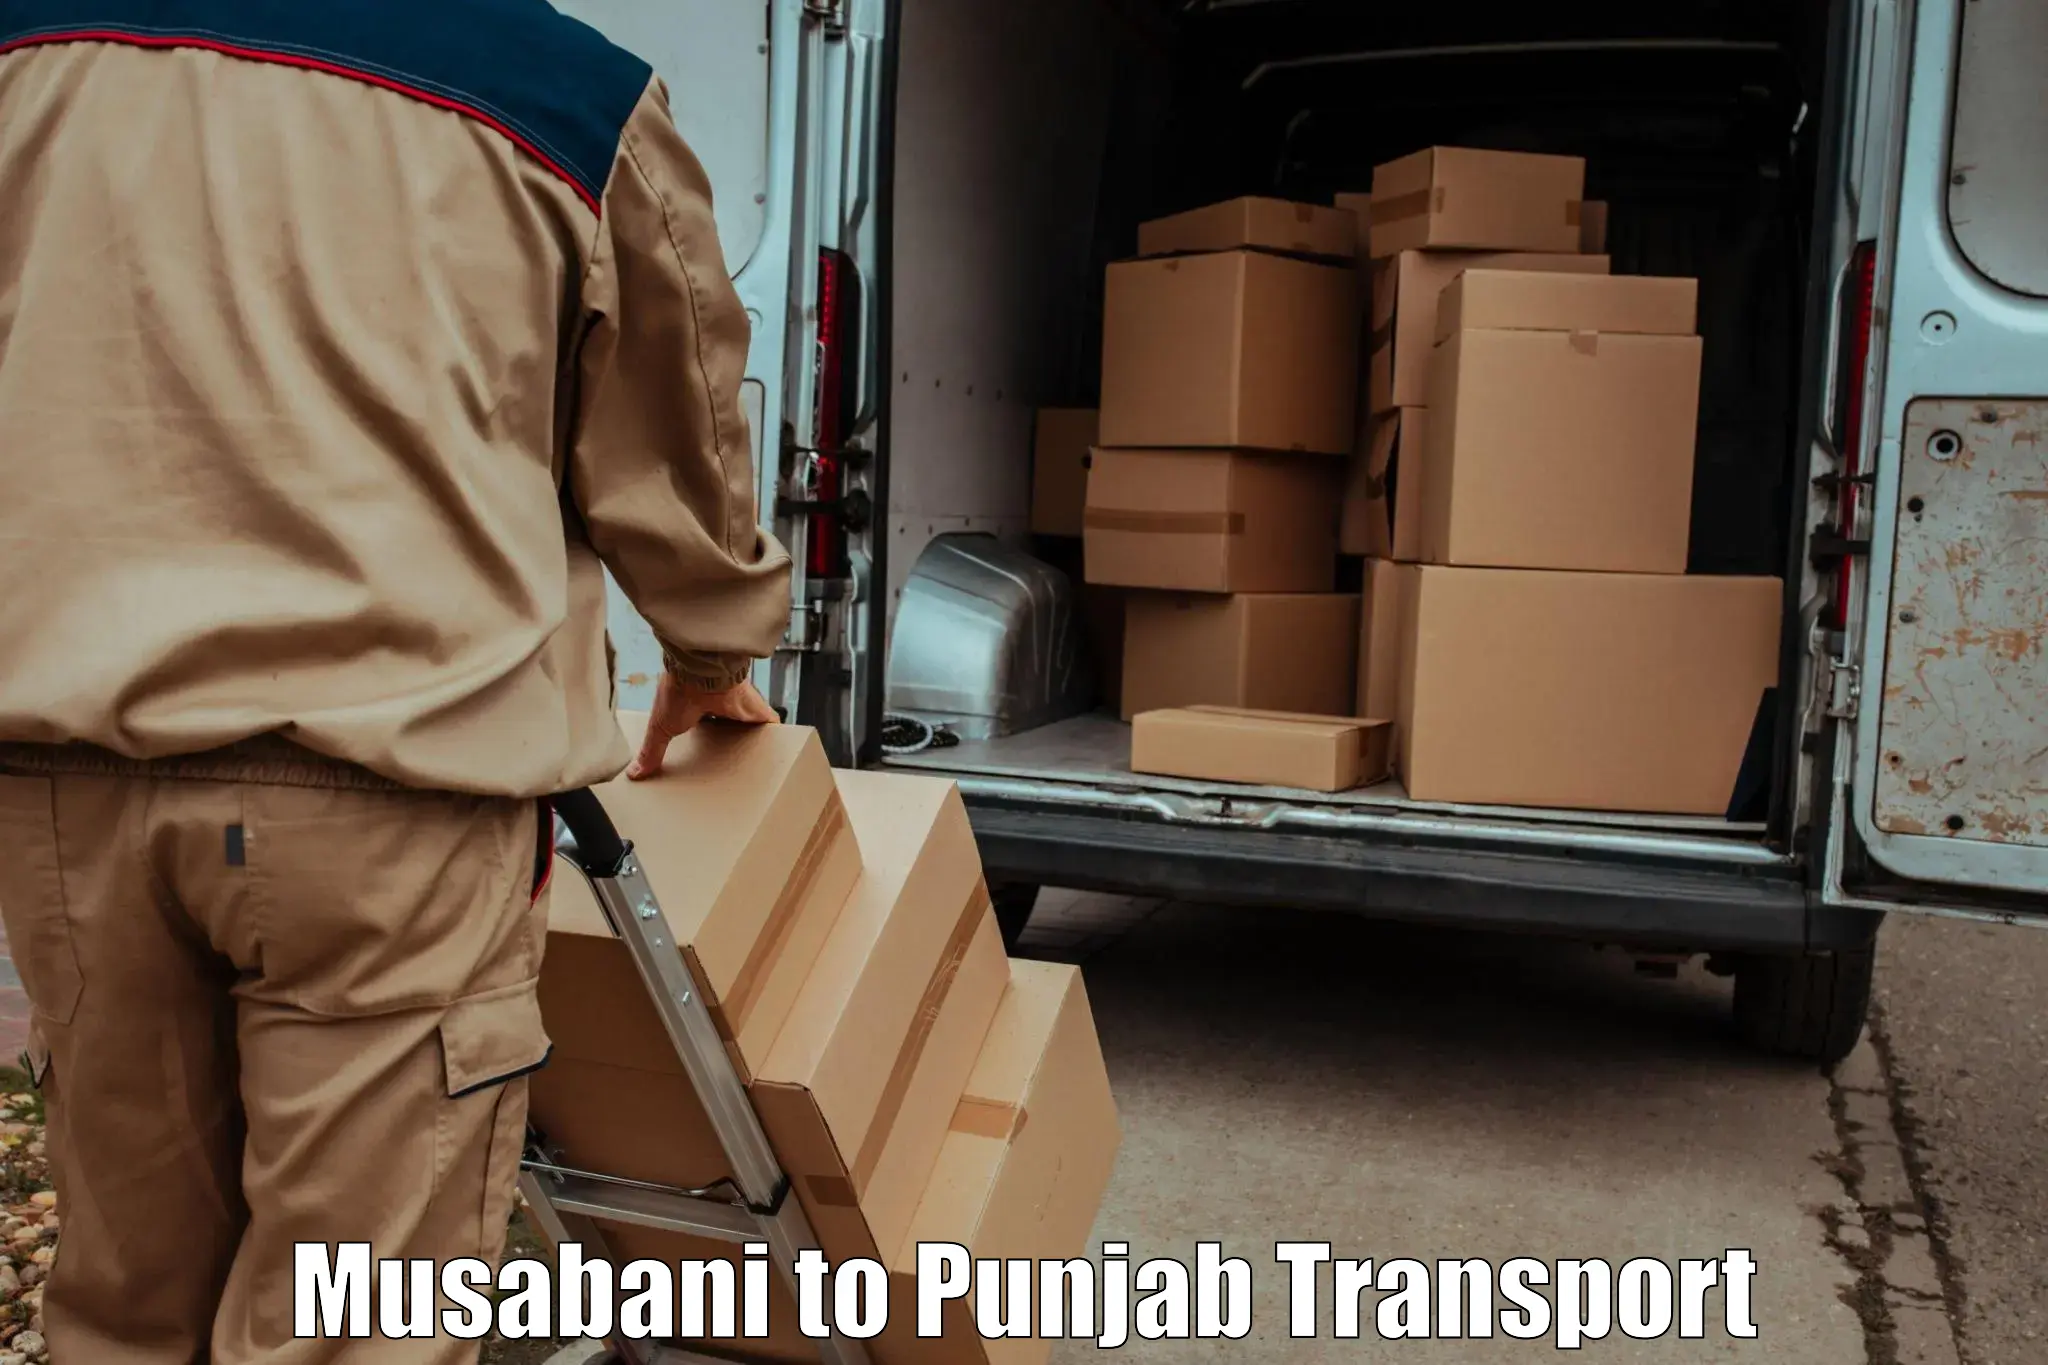 Express transport services Musabani to Sultanpur Lodhi